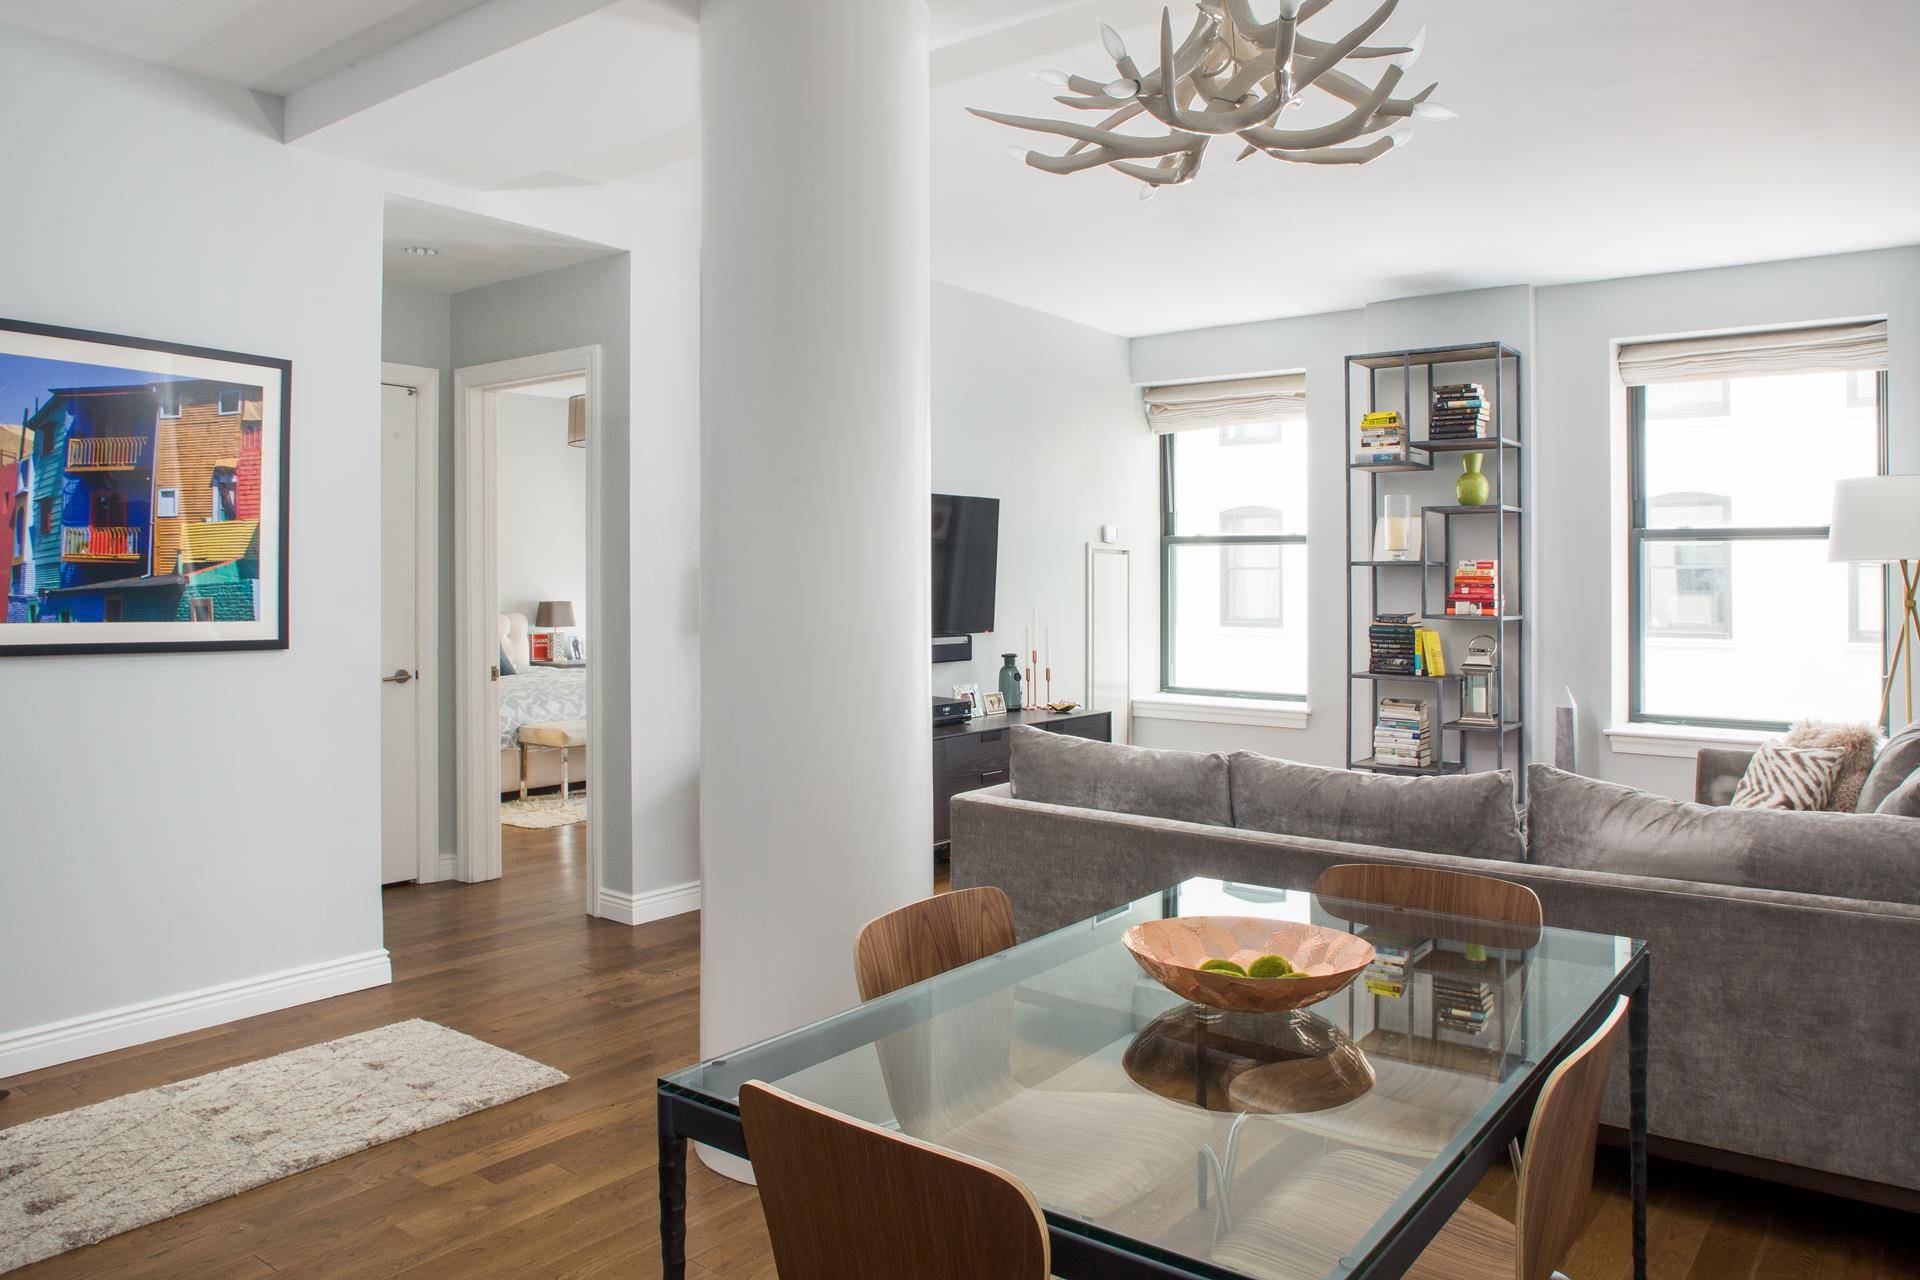 Situated right on Madison Square Park is this gracious 1 bedroom, 1.